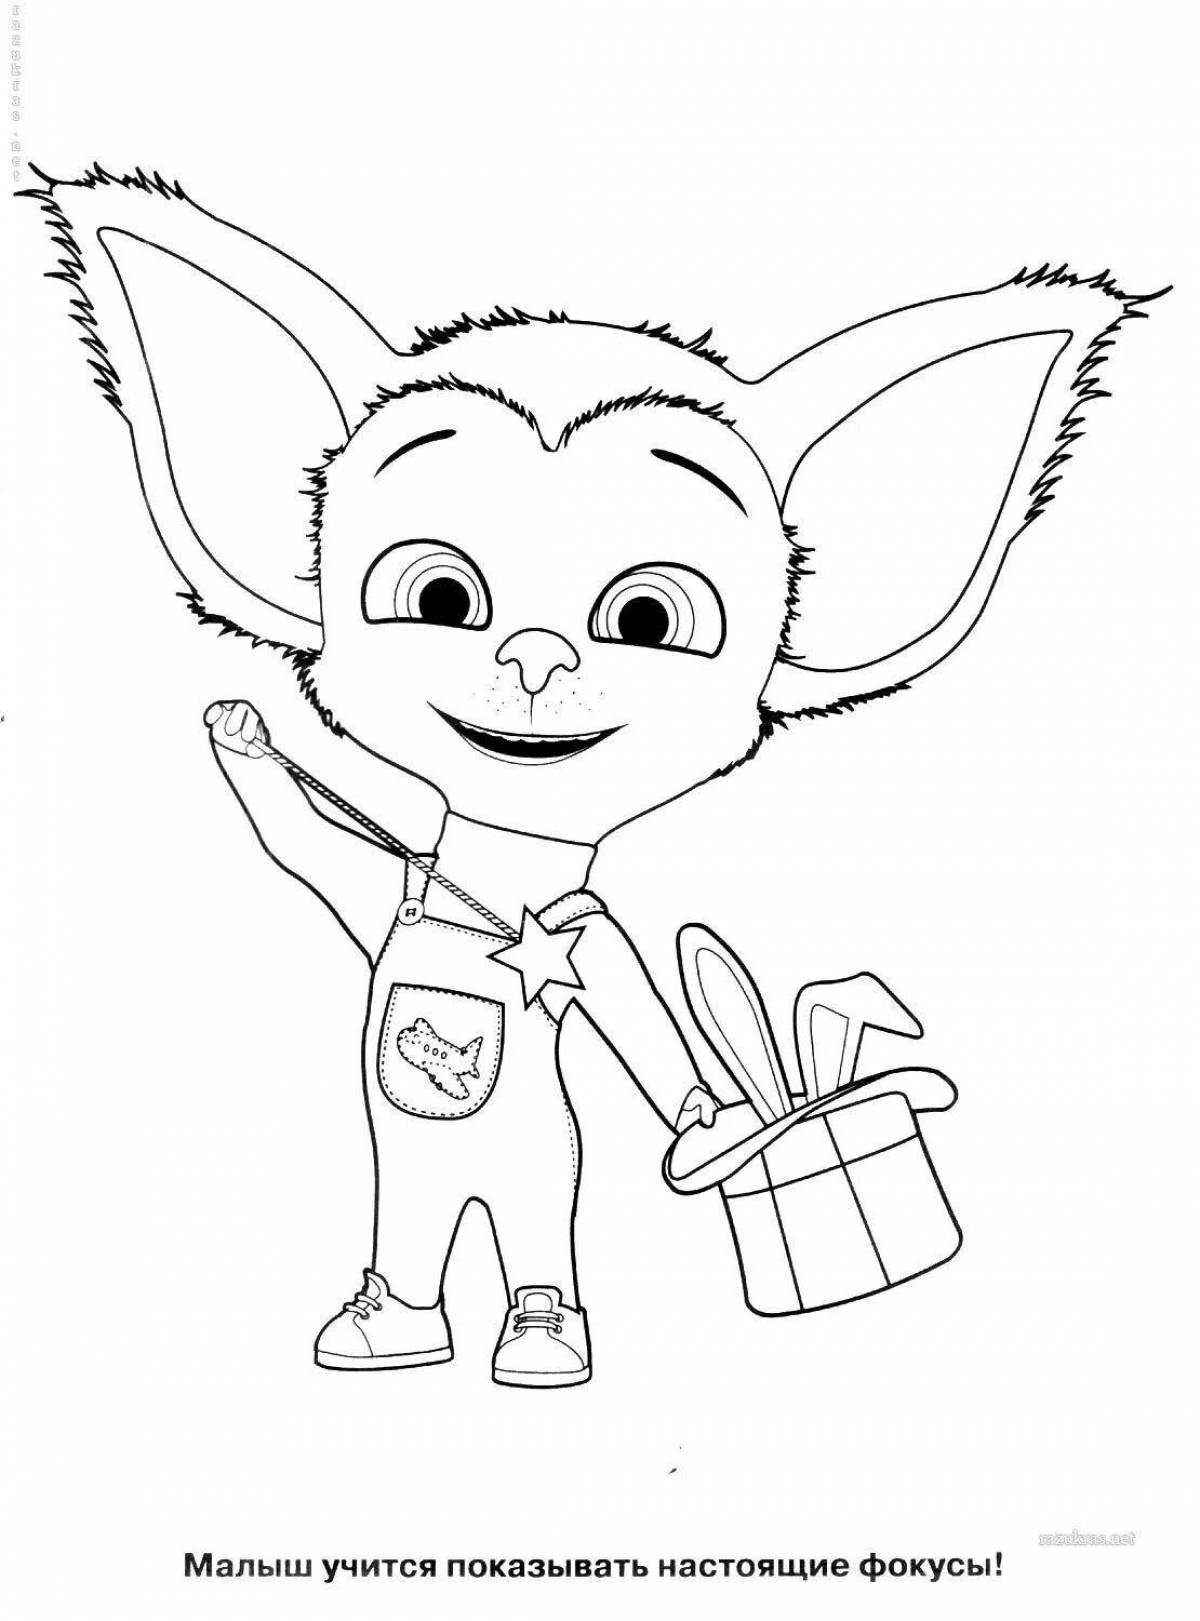 Adorable Barboskin Cartoon Coloring Pages